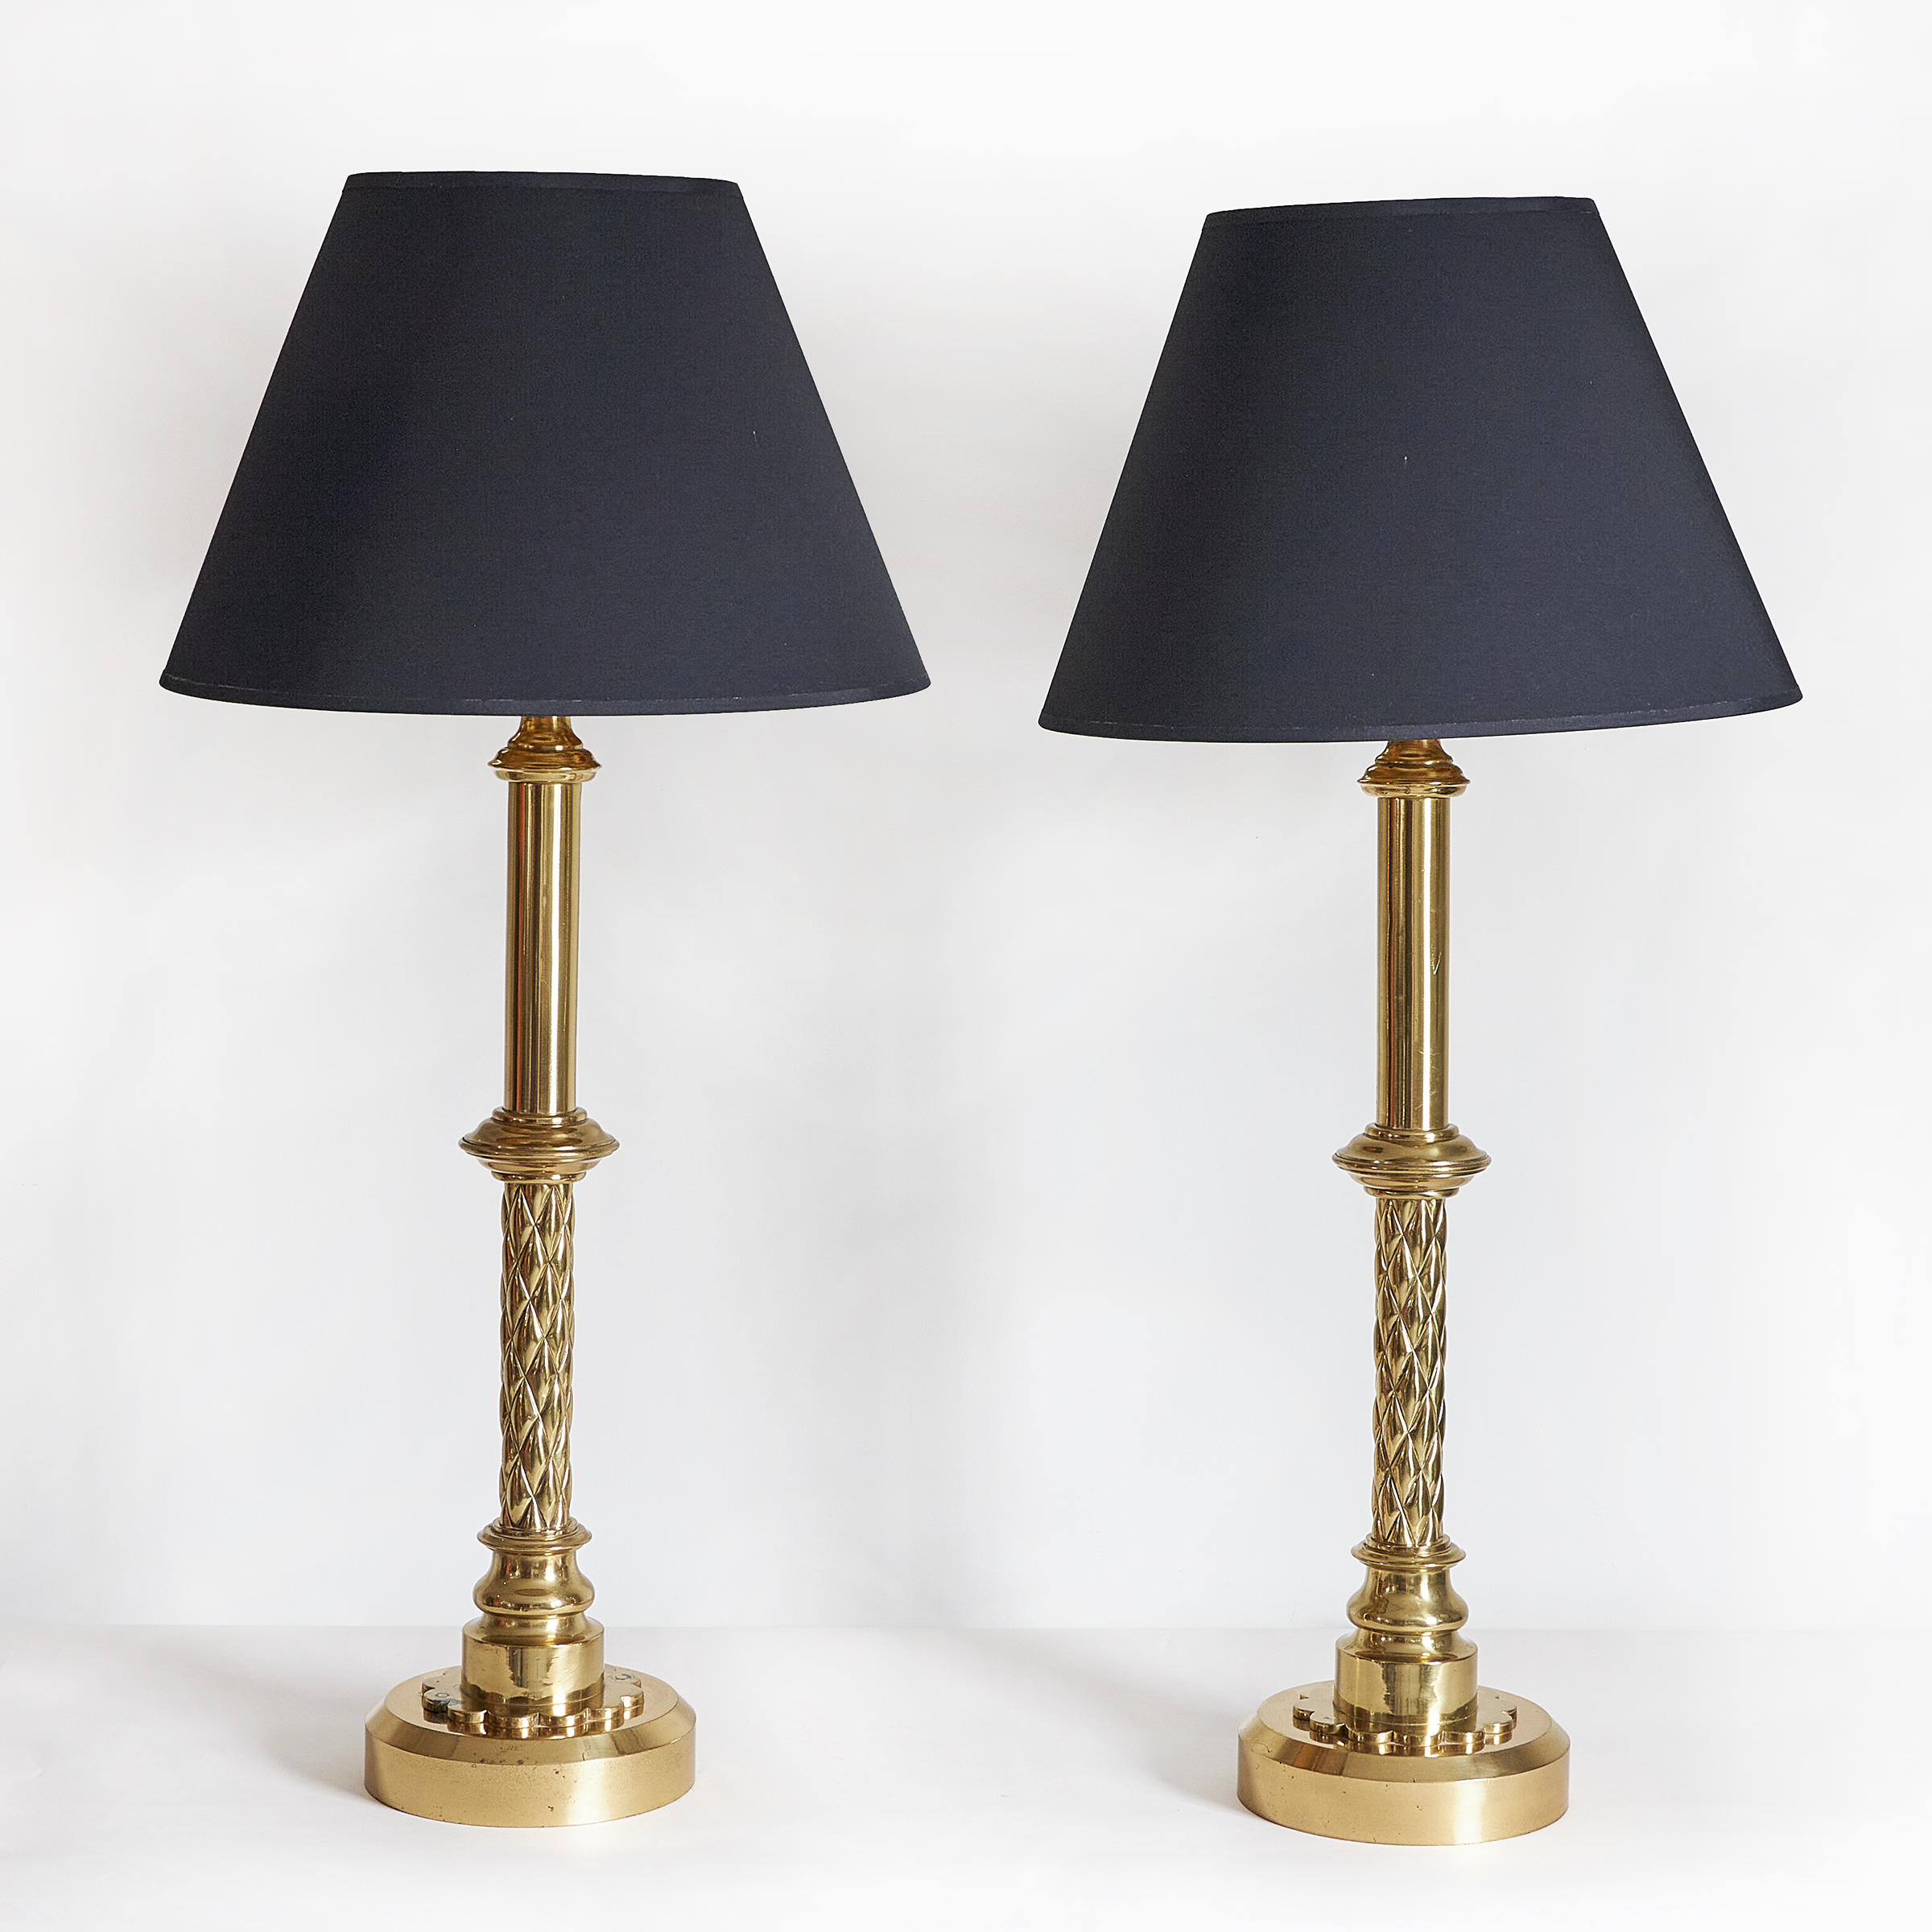 Pair Of Tall Gilt Bronze Gothic Revival, Black Gothic Table Lamps